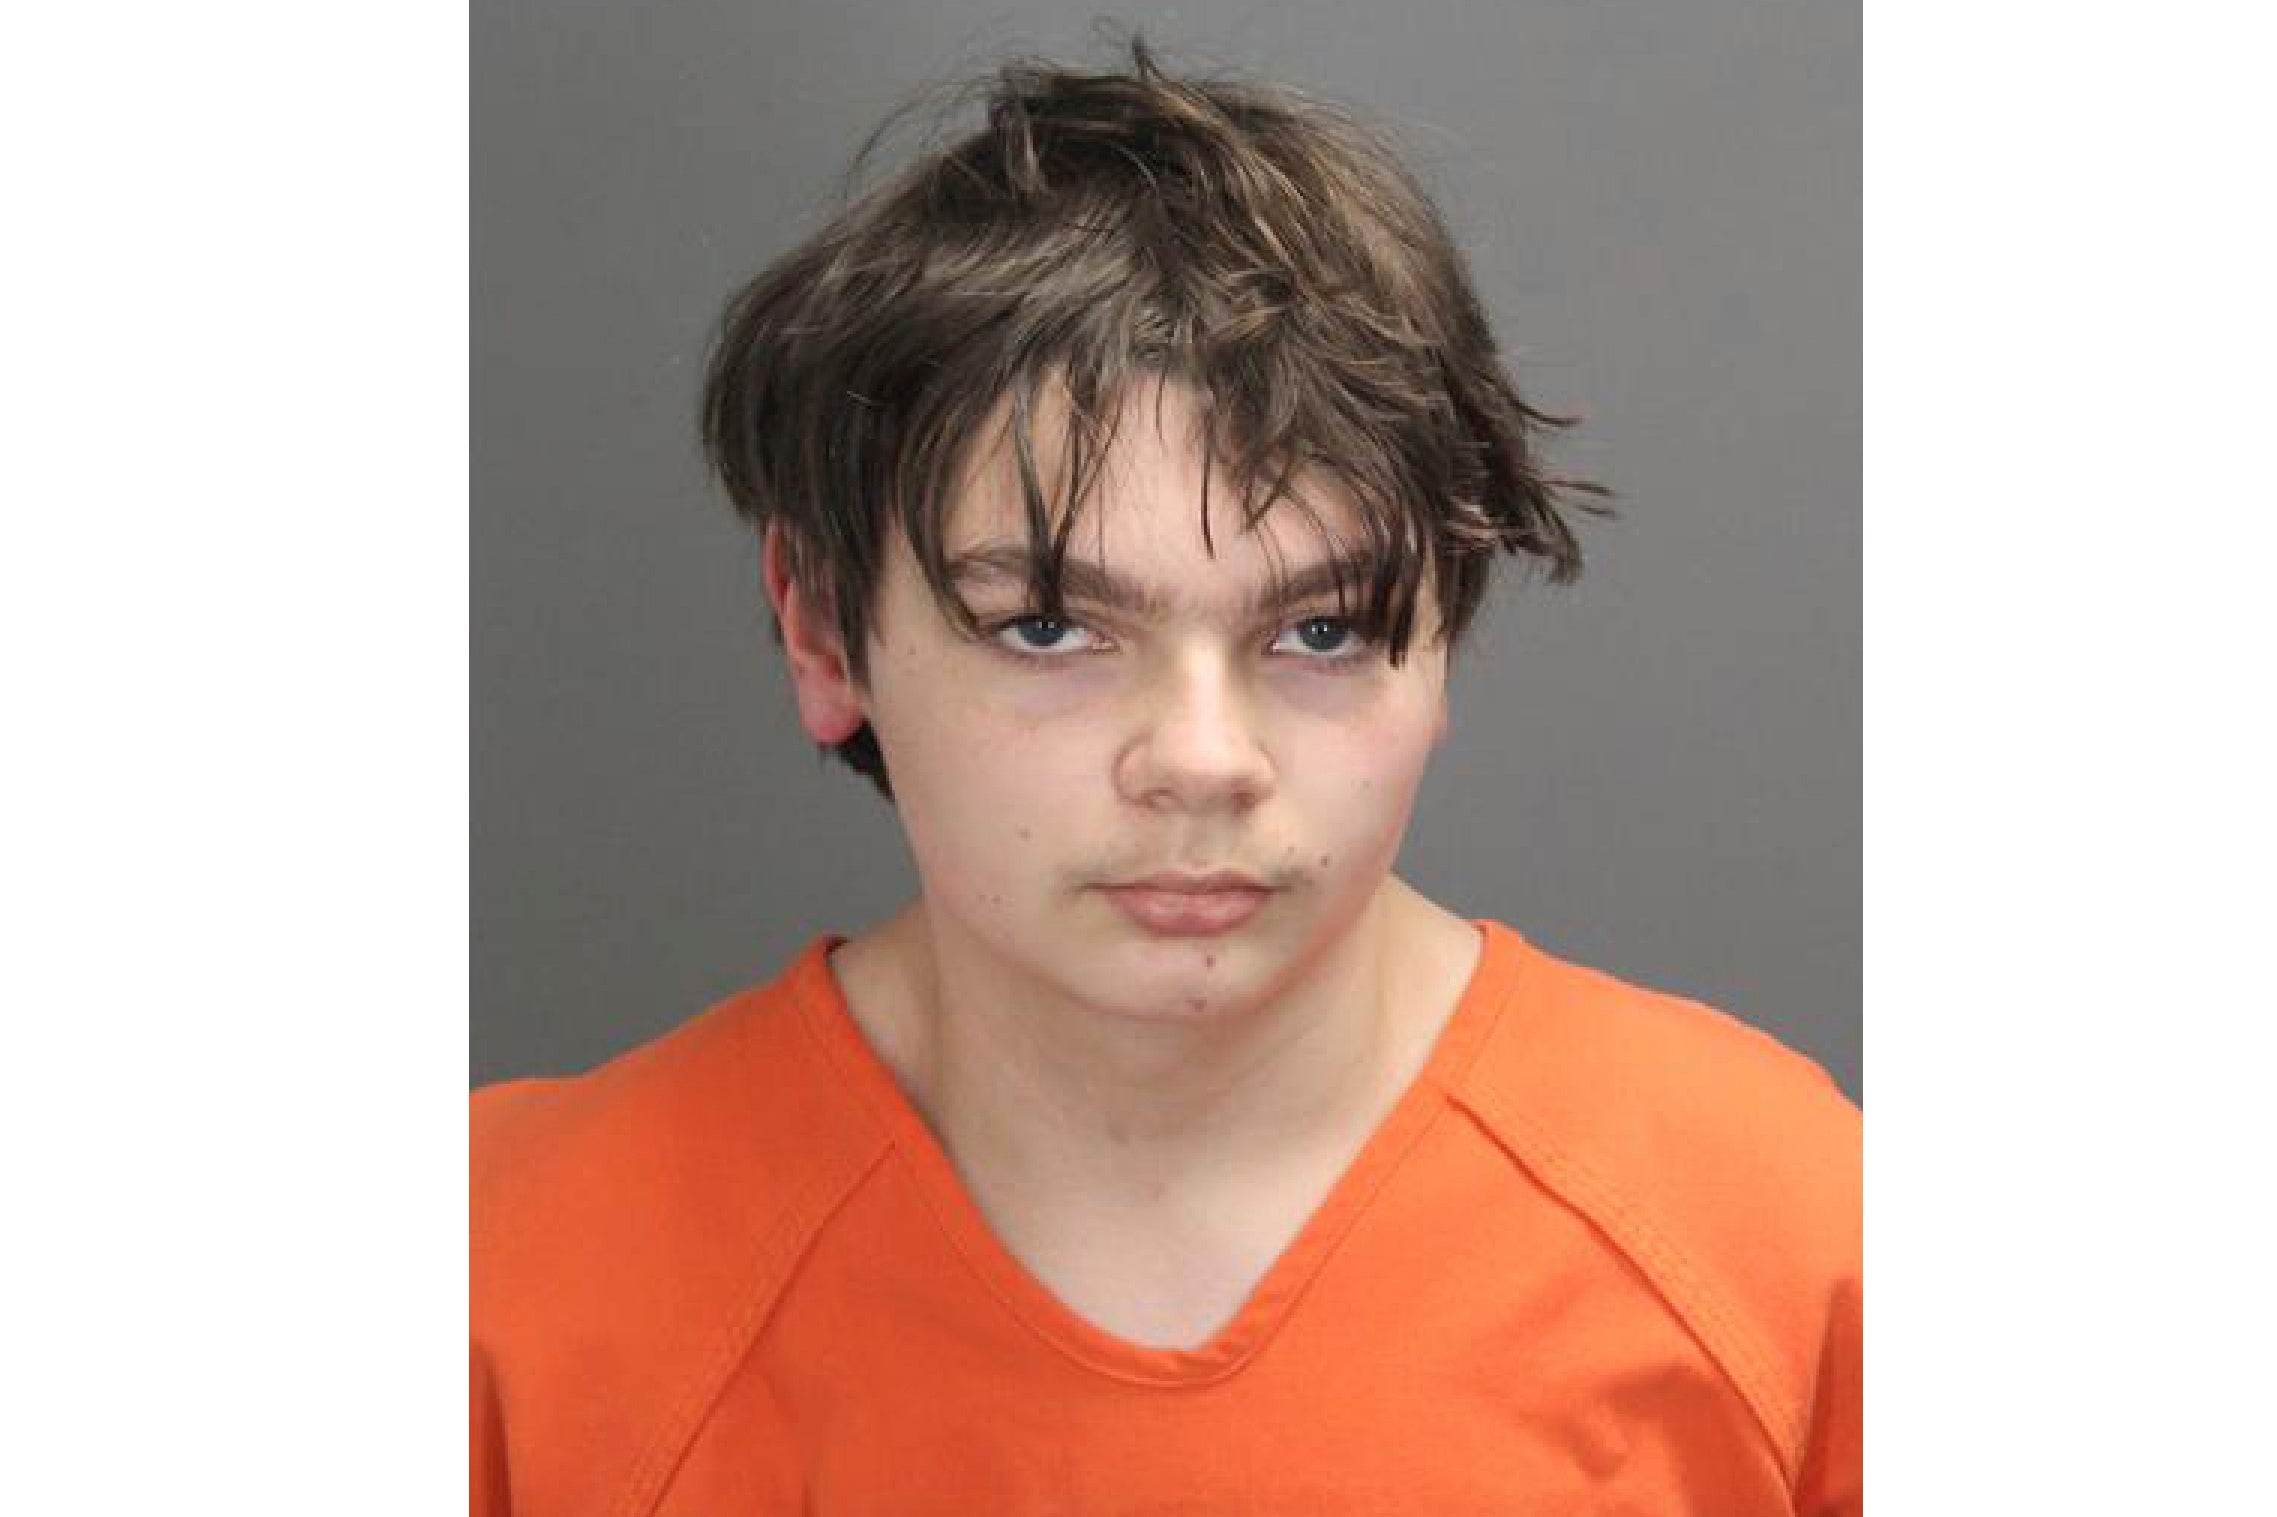 This booking photo released by the Oakland County, Mich., Sheriff's Office shows Ethan Crumbley, 15, who is charged as an adult with murder and terrorism for a shooting that killed four fellow students and injured more at Oxford High School in Oxford, Mich., authorities said Wednesday, Dec. 1, 2021.